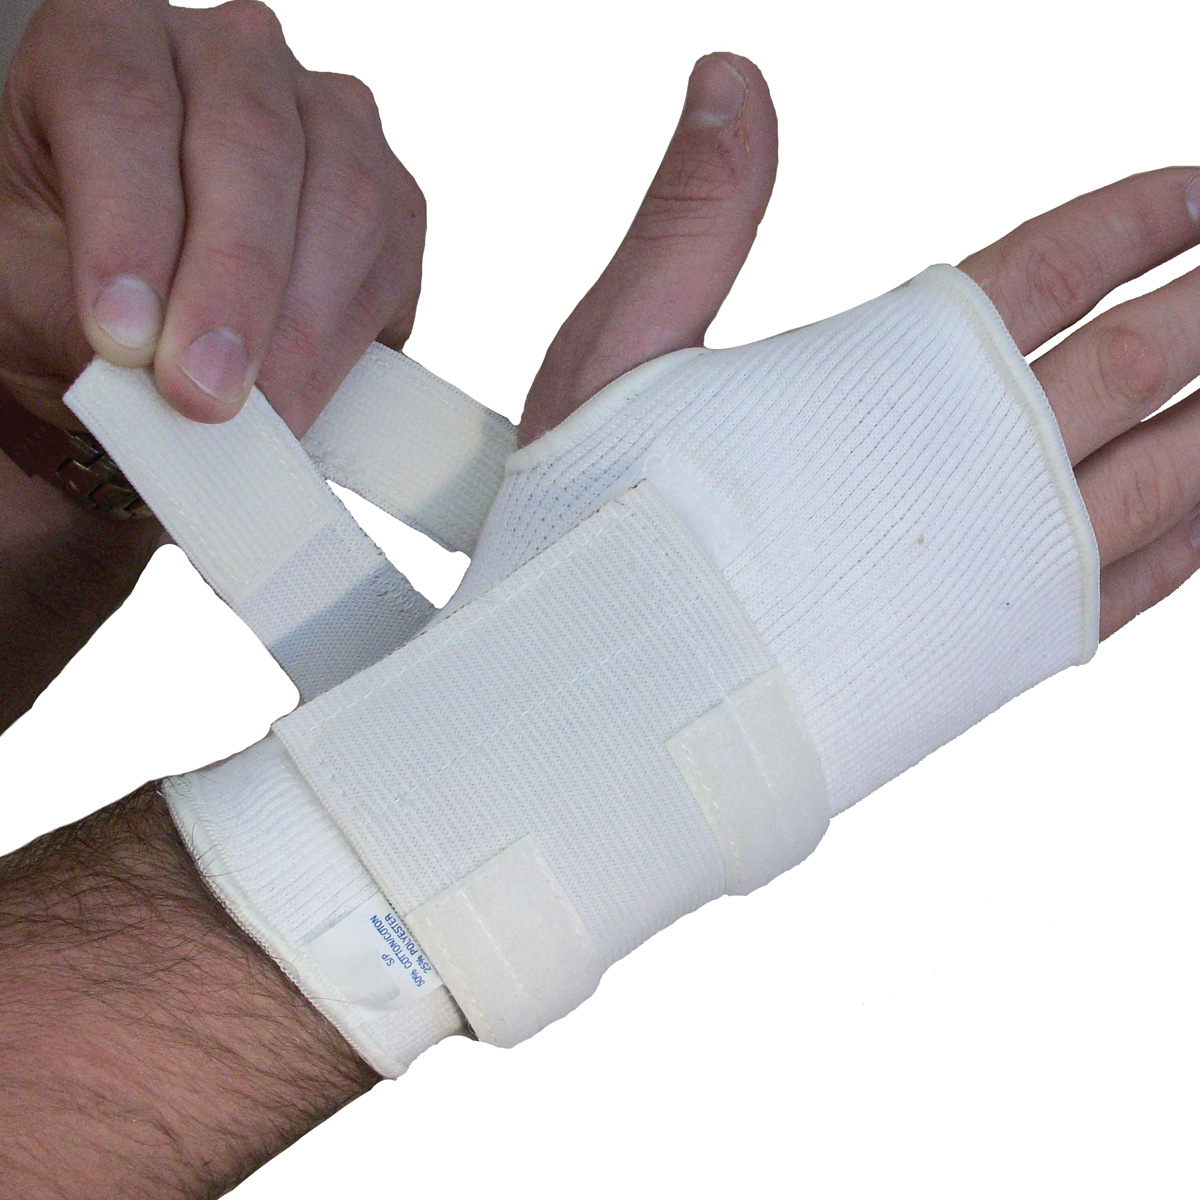 IMPACTO ER1004 LLH WRIST SUPPORT DIMPLE PAD KNIT